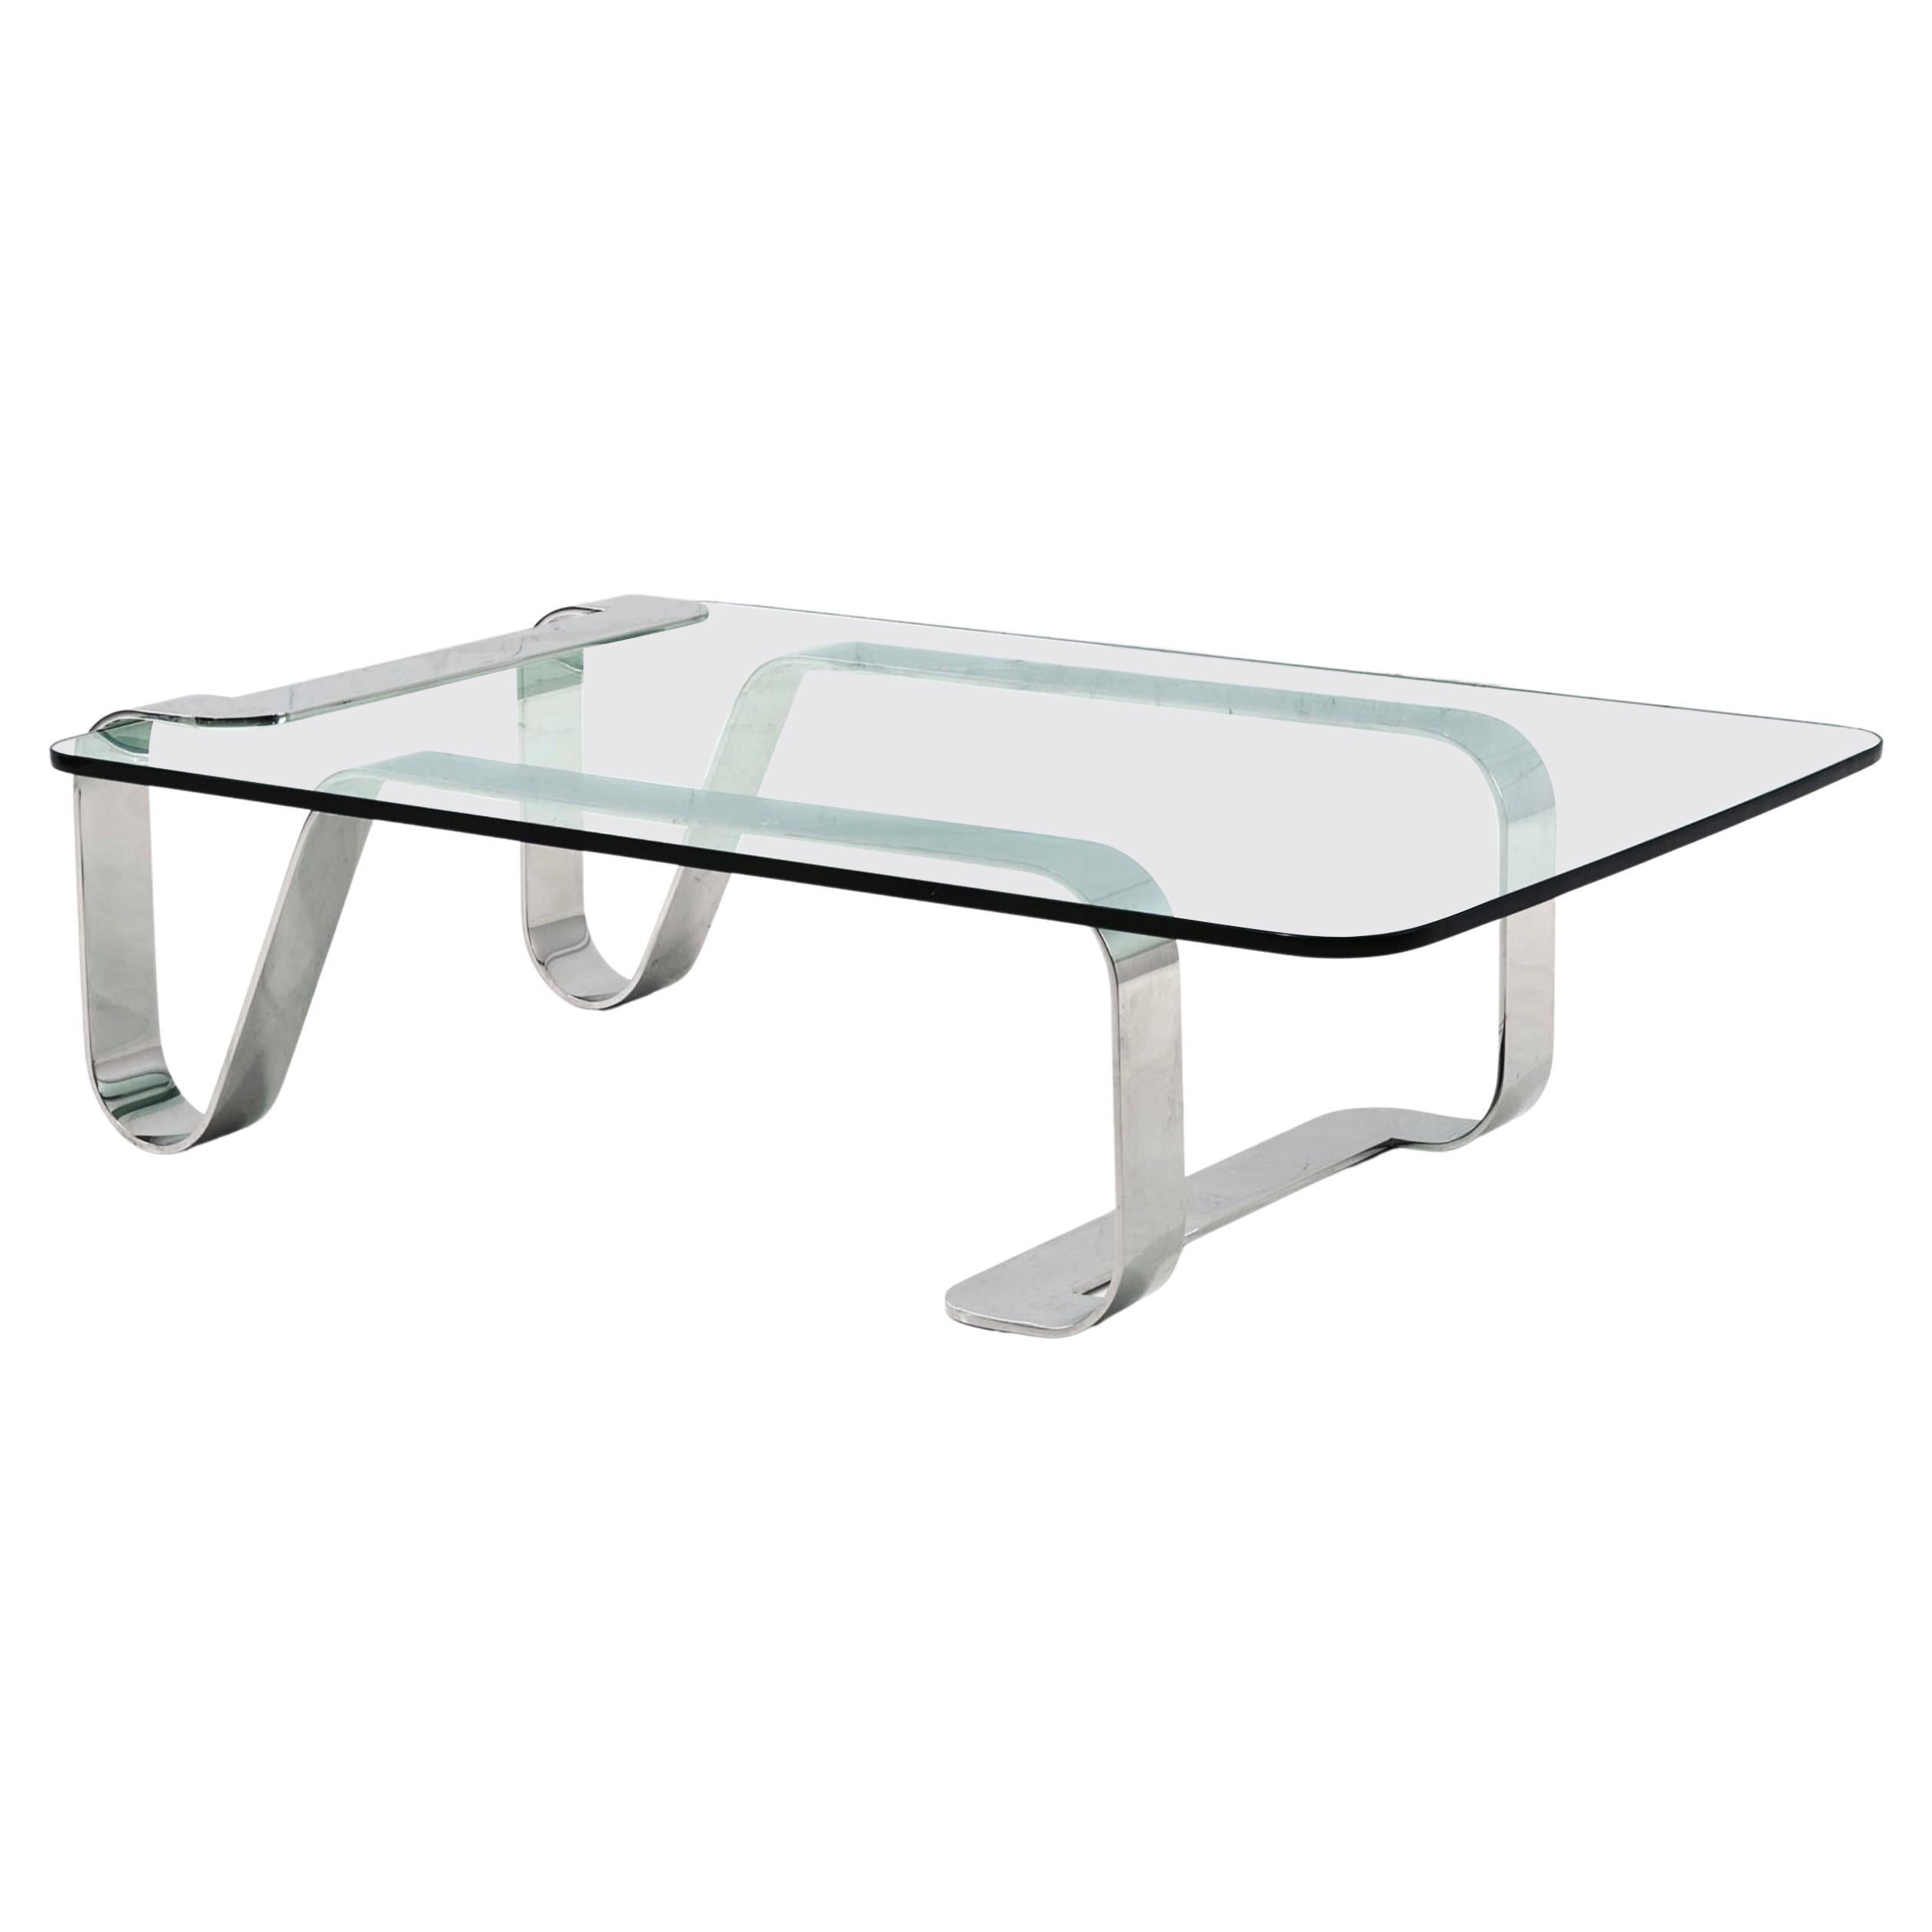 Steel and Glass "Odyssey" Coffee Table by Gary Gutterman, 1970 For Sale